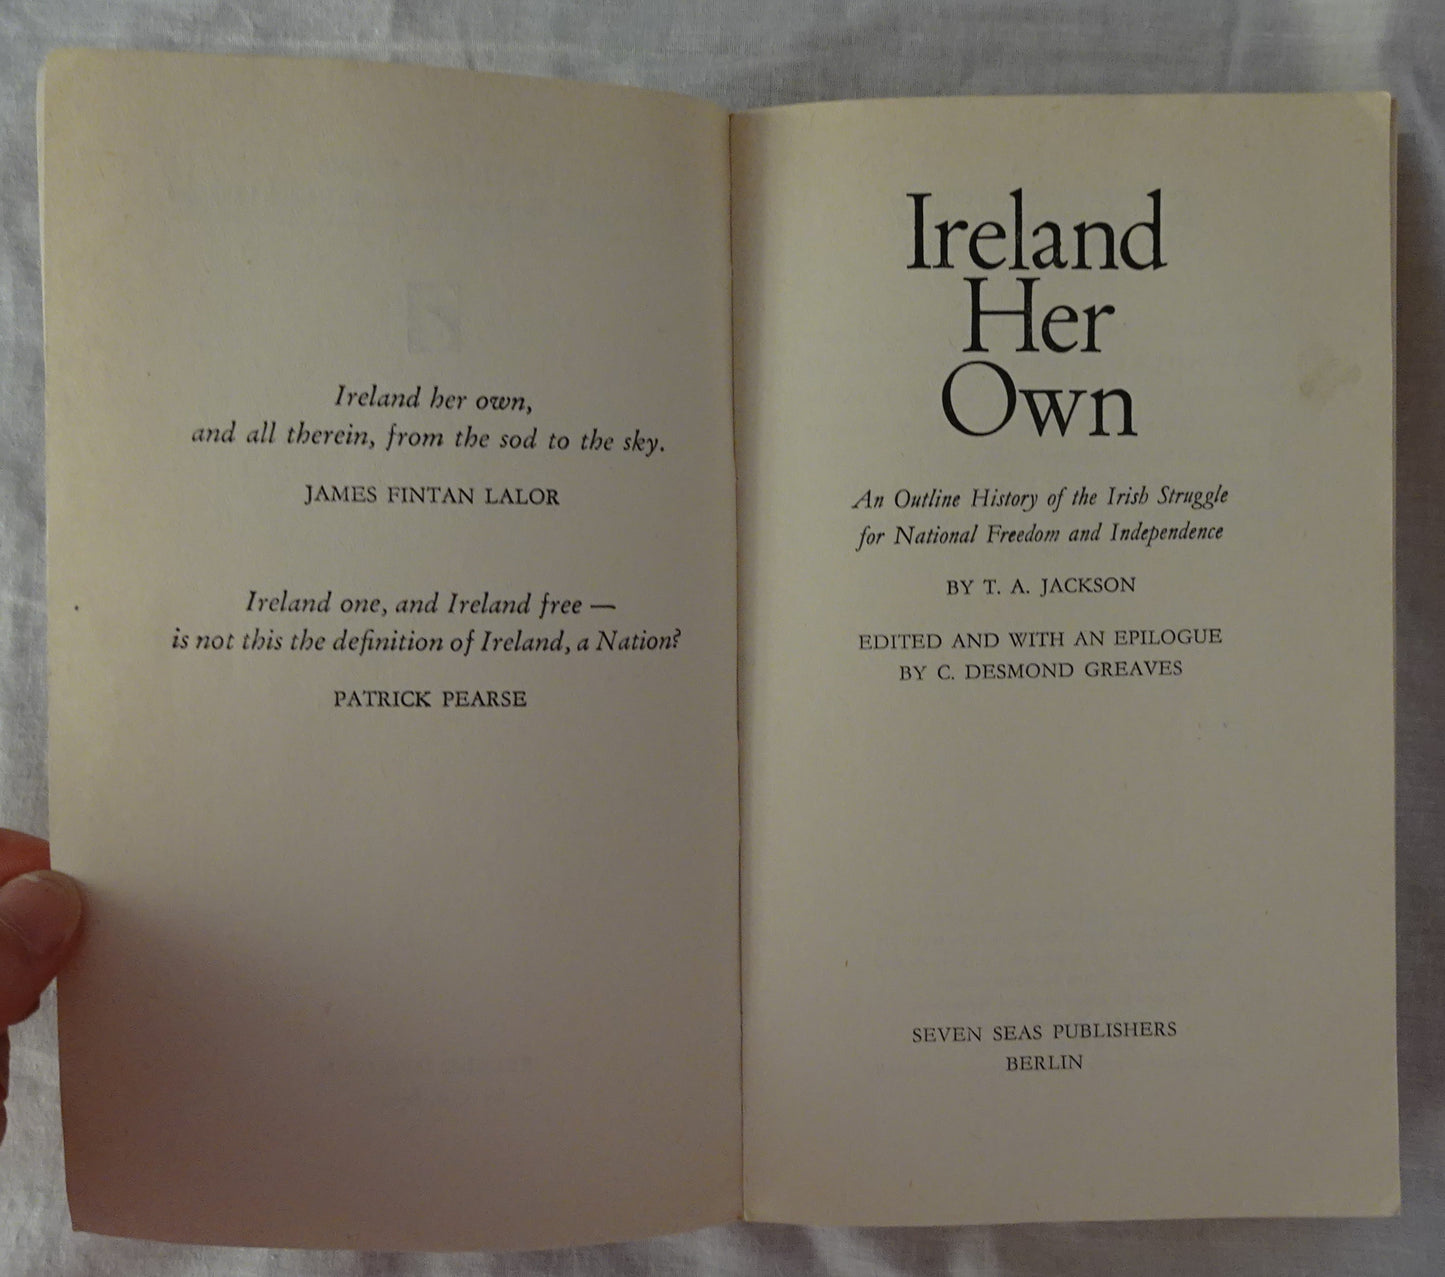 Ireland Her Own by T. A. Jackson